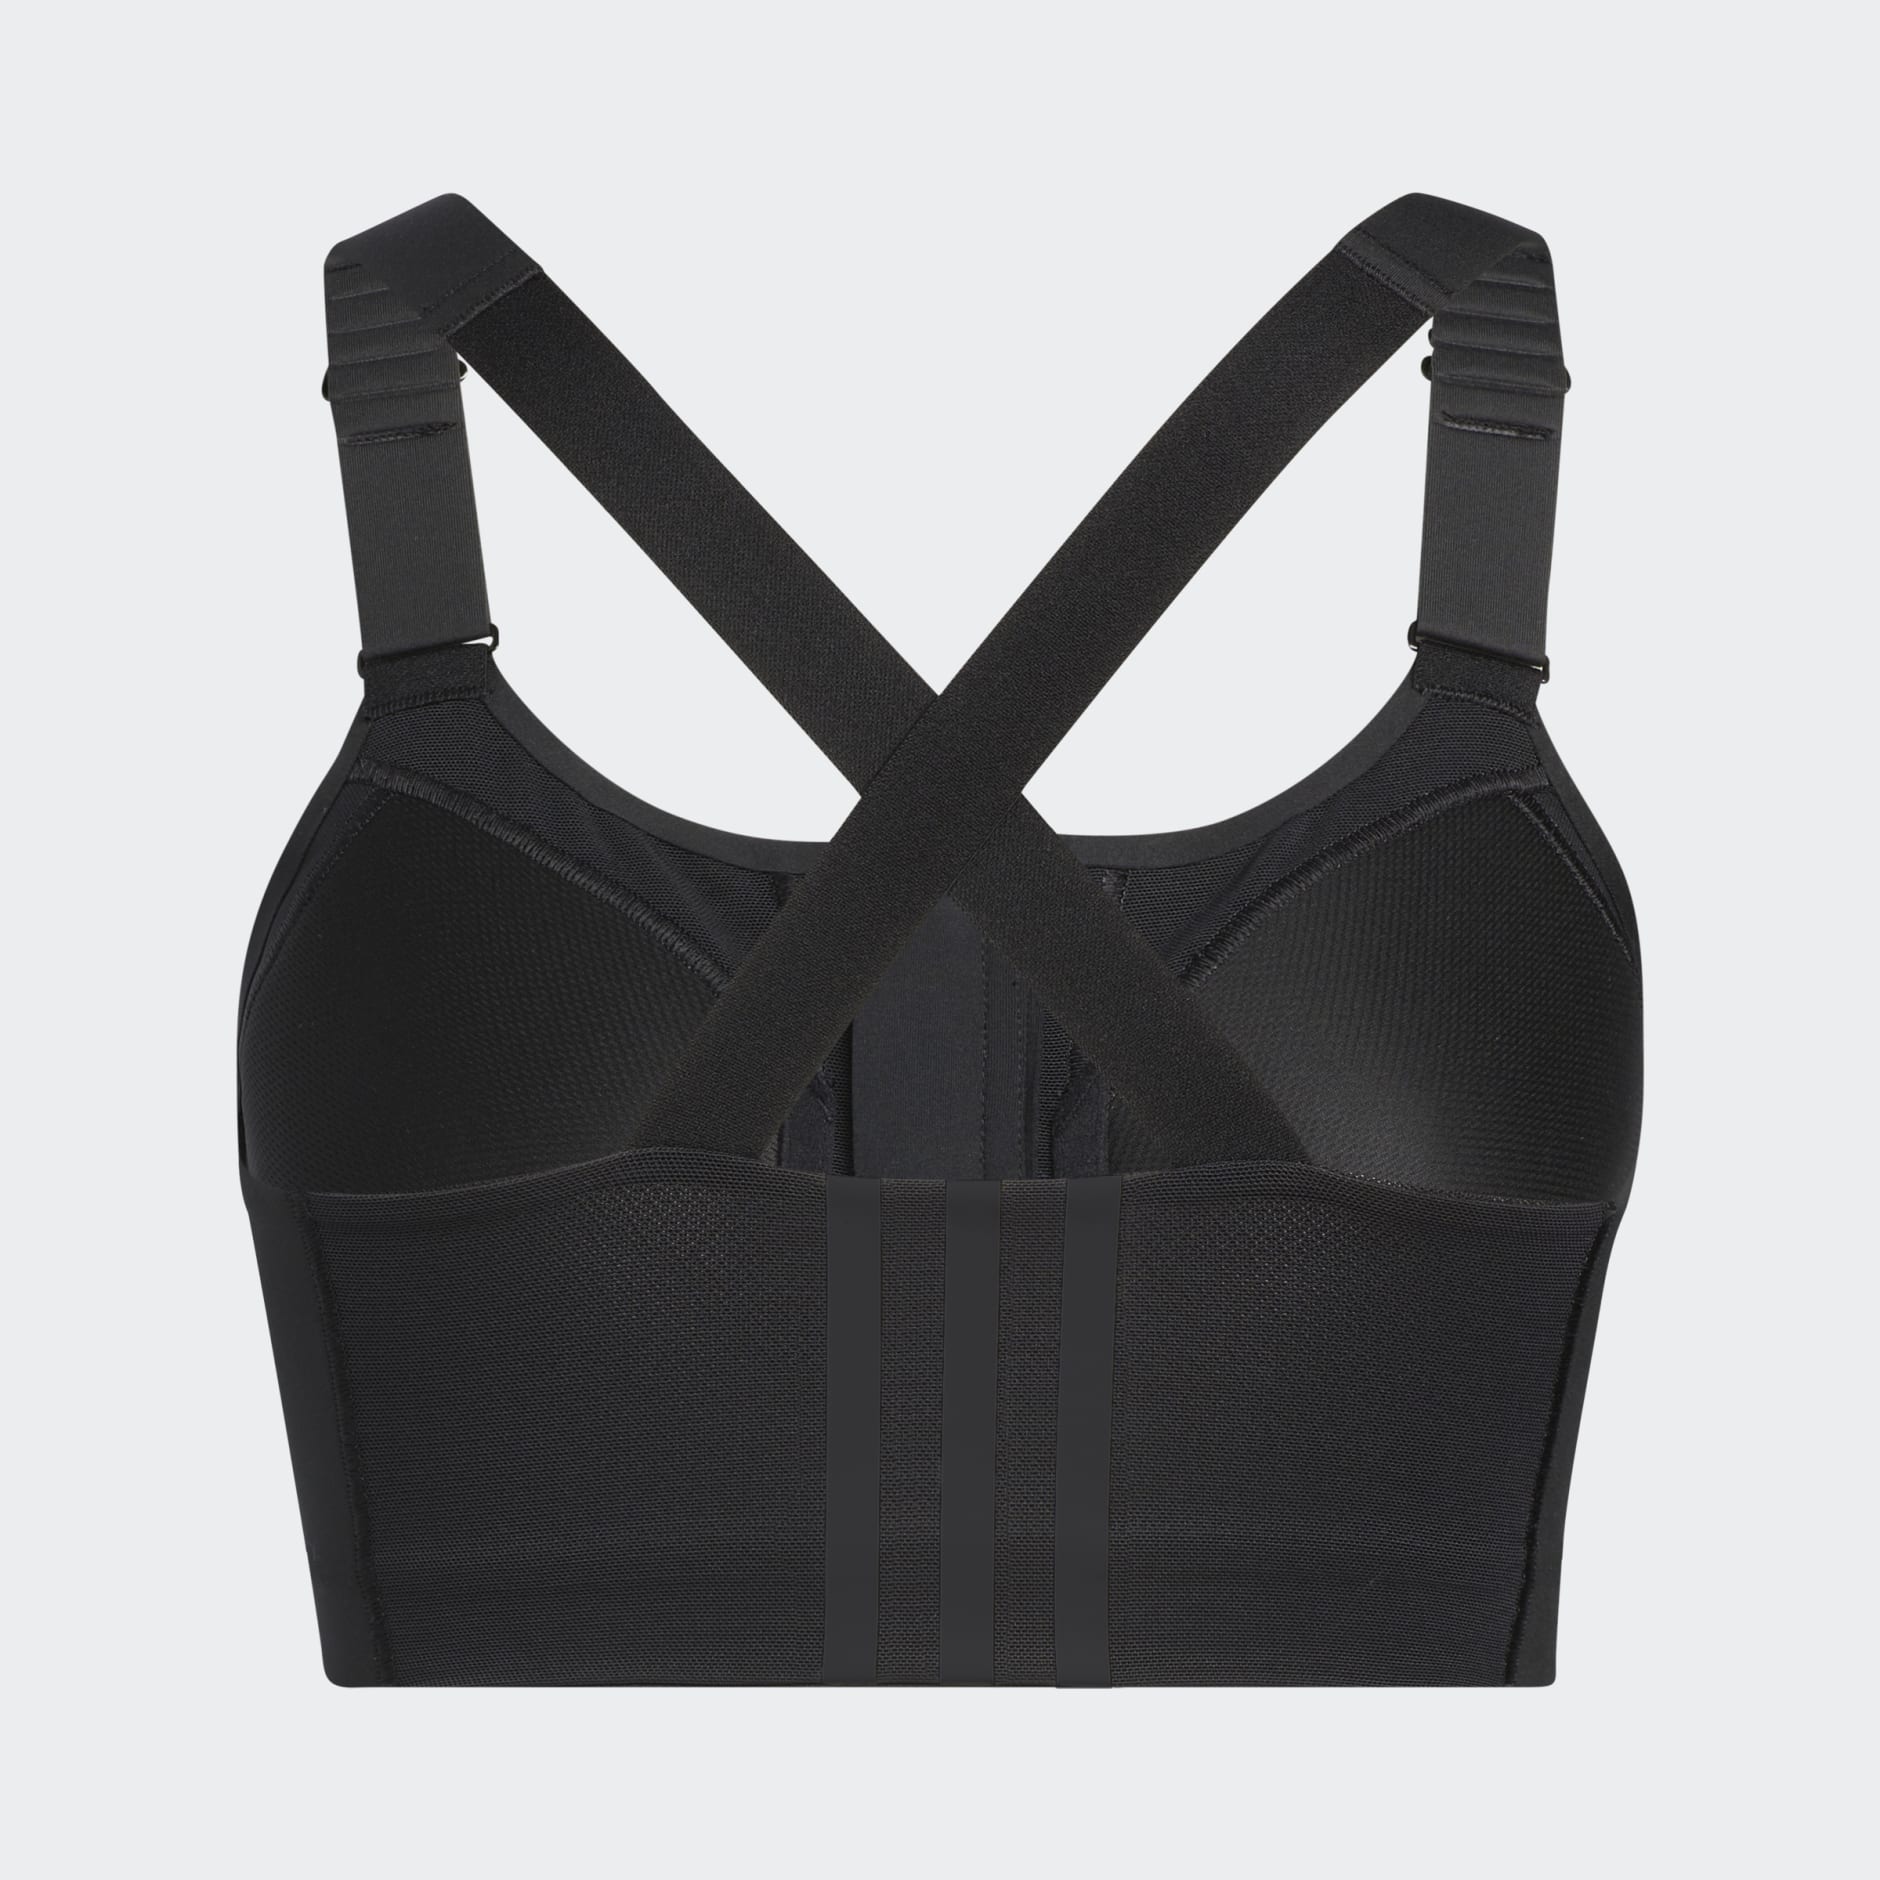 Adidas Women's Athletic High Support Sports Bra Size 30G Black